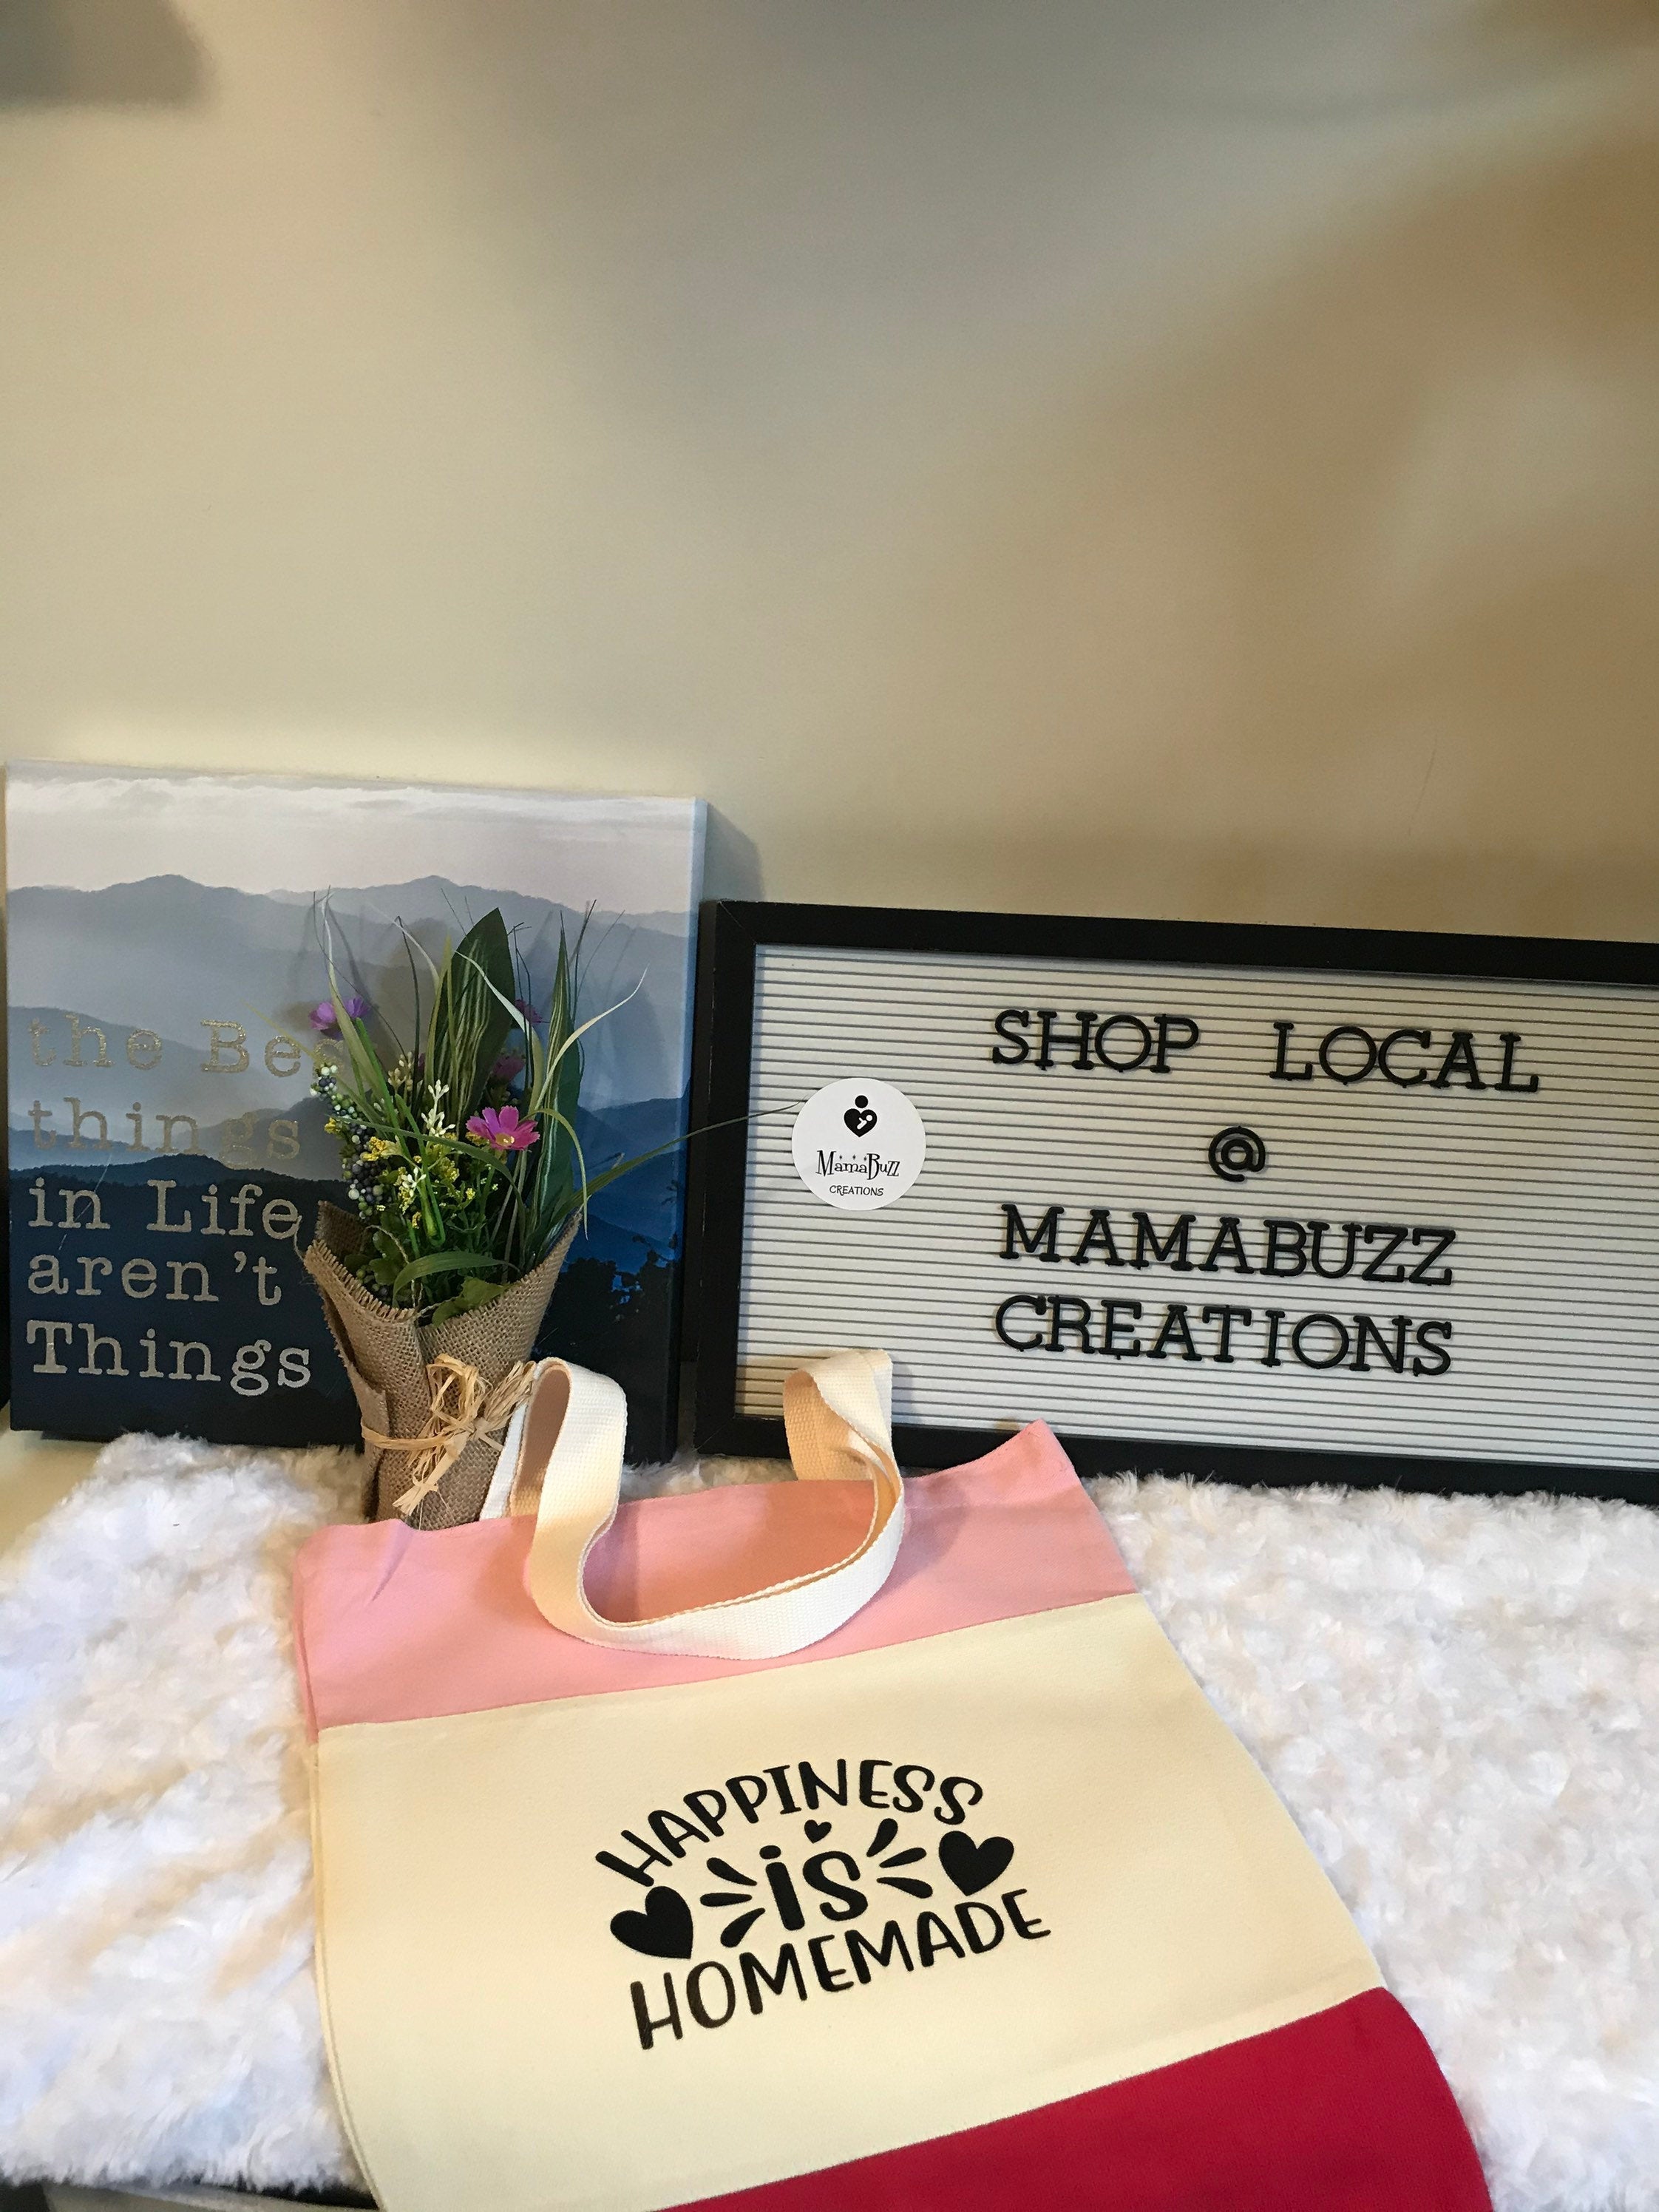 Happiness is Homemade,Tote bag,Shopping bag,Travel bag,Canvas Bag,Custom Canvas bag,Canvas Tote Bag,Craft Bag,Mom Bag,Beach Bag, Travel Tote - MamaBuzz Creations